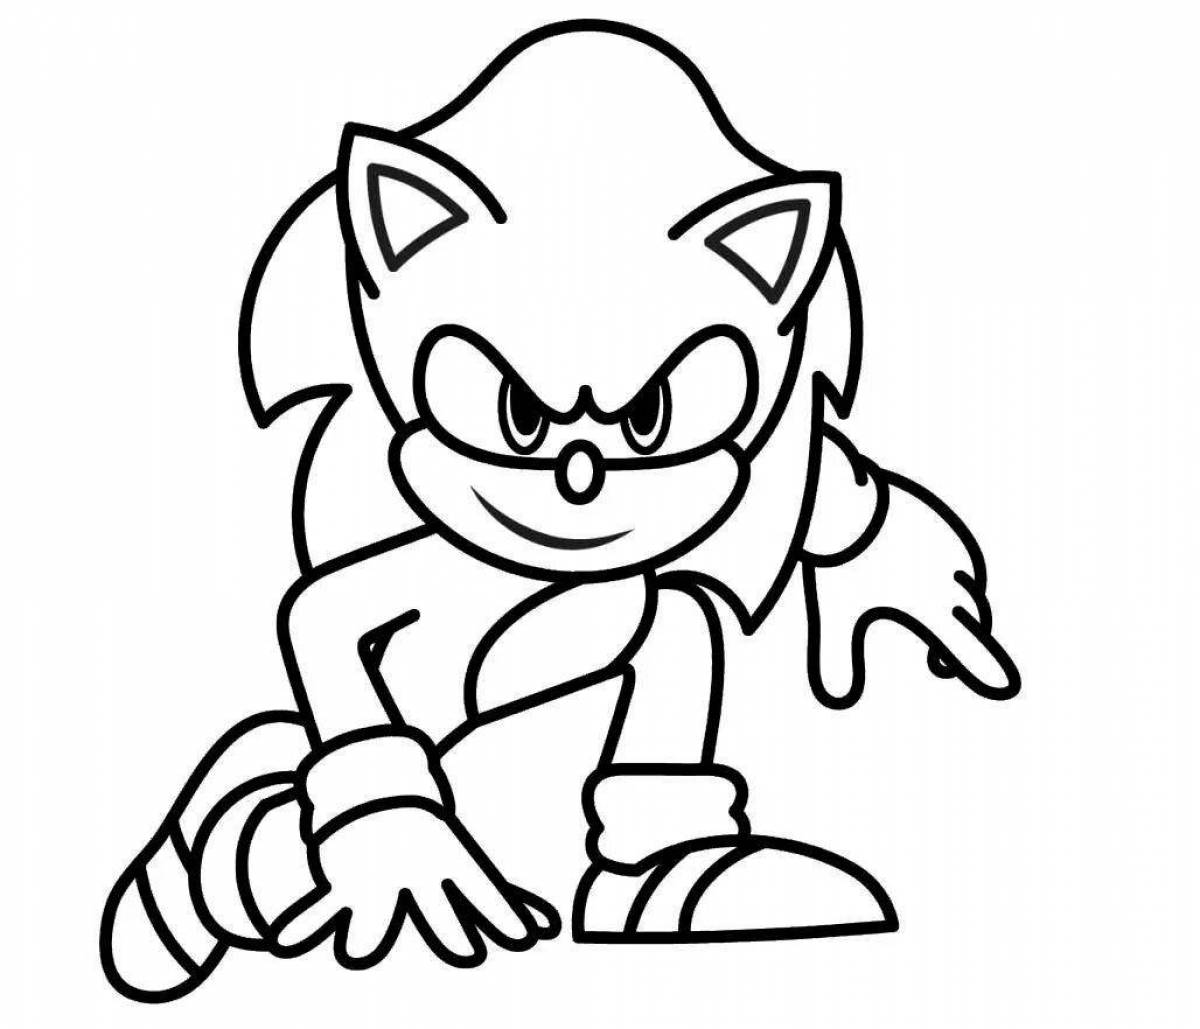 Fantastic sonic exe fnf coloring book